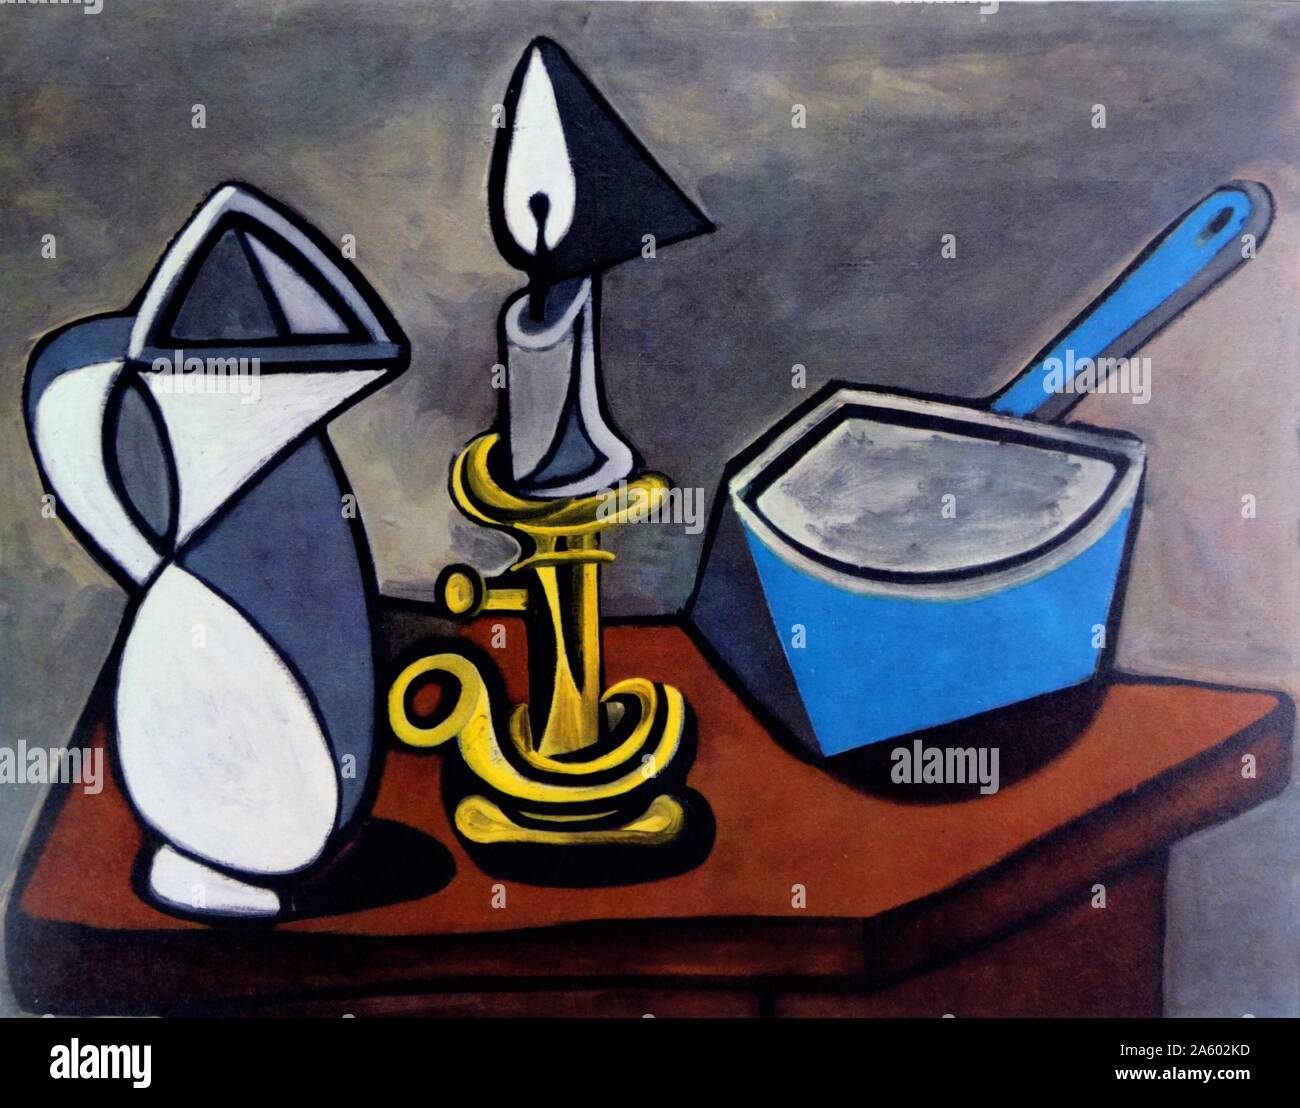 Still Life with cooking pot 1945, by Pablo Picasso (1881 – 1973), Spanish painter, sculptor, printmaker, ceramicist, stage designer, poet and playwright.  If you want to use our images of Pablo Picasso's works, you have to ask for the authorization to Picasso Administration 8 rue Volnay 75002 Paris France Tél. 0033147036970 - Fax 0033147036960 mail : info@picasso.fr Stock Photo